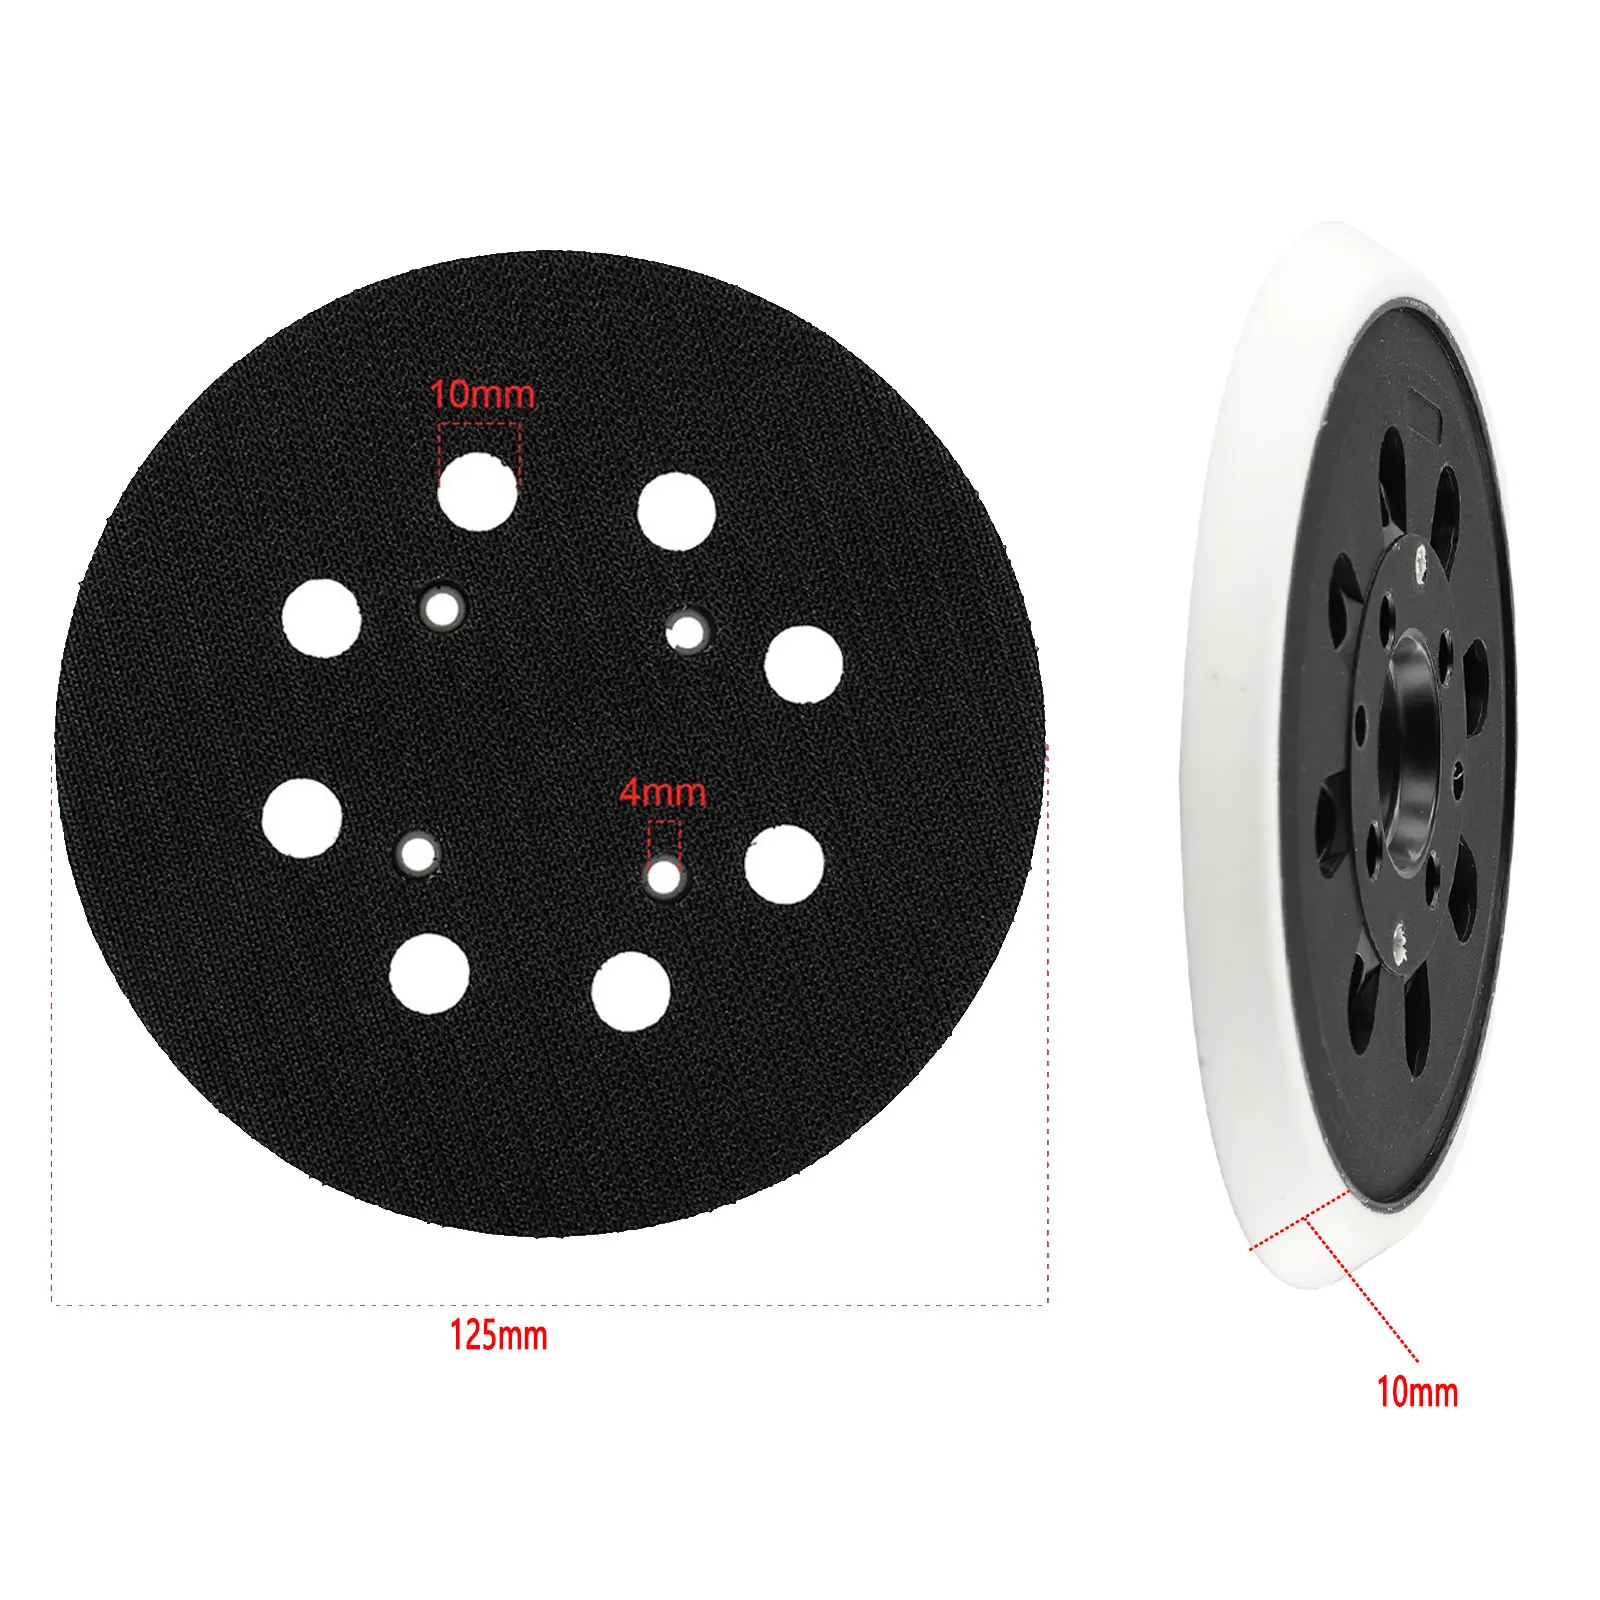 5 inch 125mm backing pad sanding pad for bosch pex 300 ae 400 ae 4000 ae polishing backing pads grinding tools sanding pad 5 Inch 125mm Backing Pad Sanding Pad Hook&loop Connection For Bosch PEX 300 AE 400 AE 4000 AE Power Tools Accessories